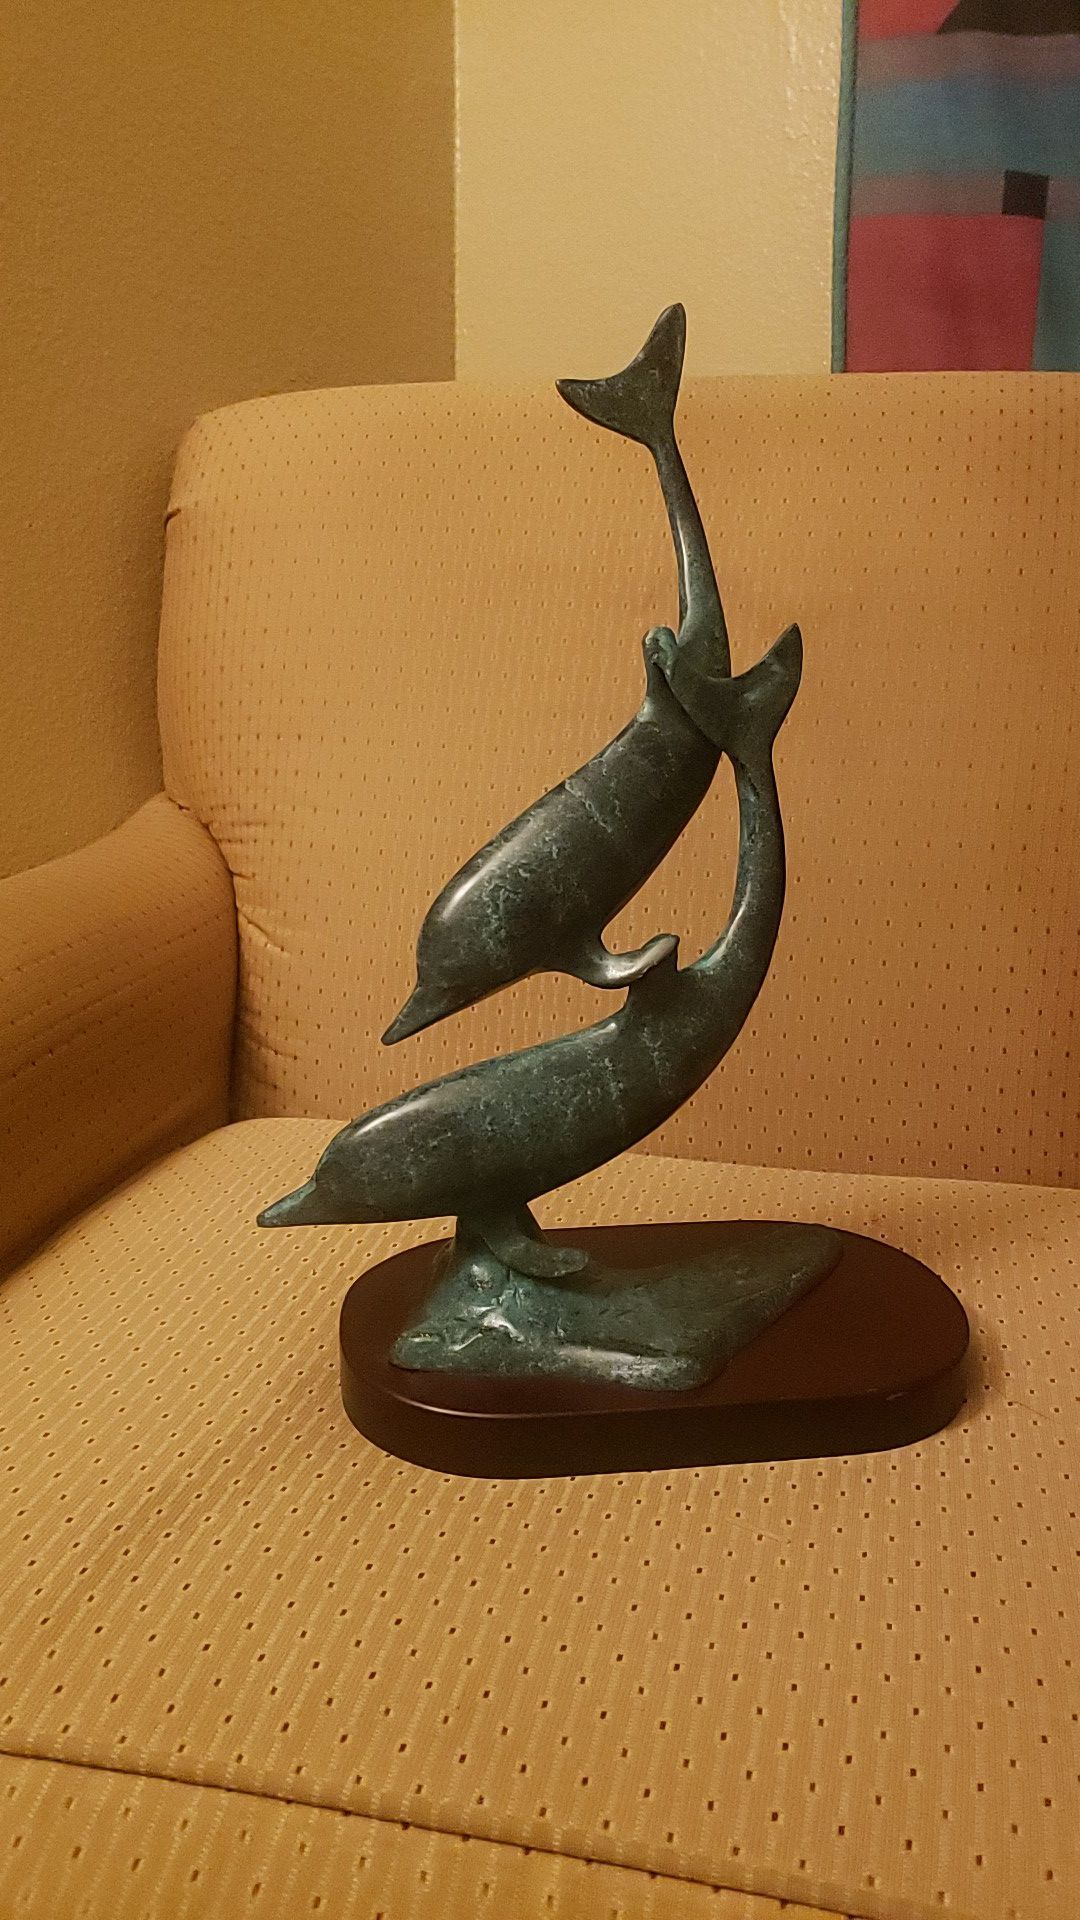 Unmarked solid bronze dolphins swimming silhouette